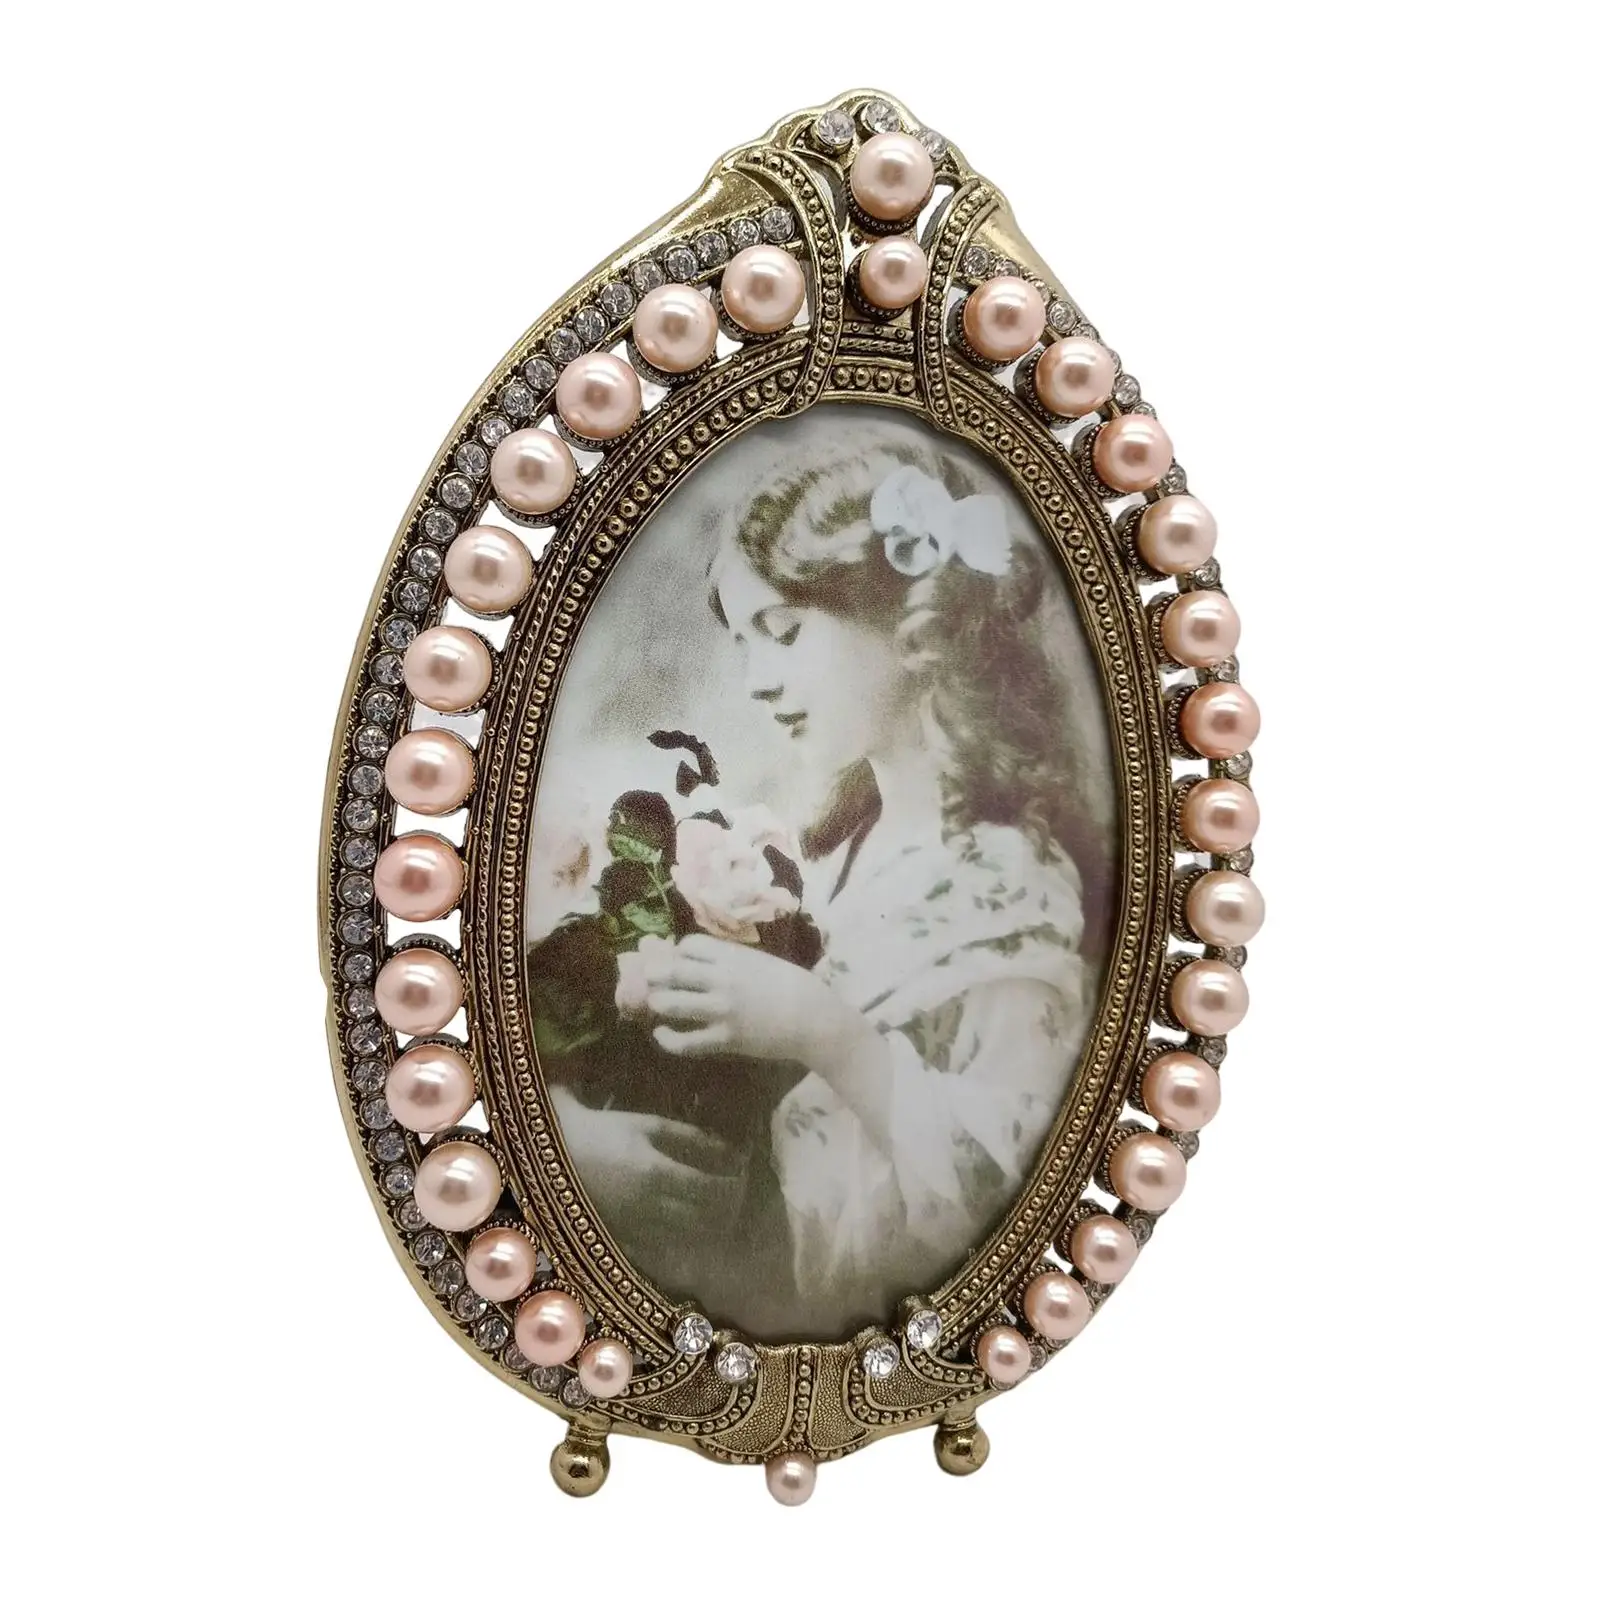 European Retro Style Photo Frame with Pearls Picture Display Holder Freestanding